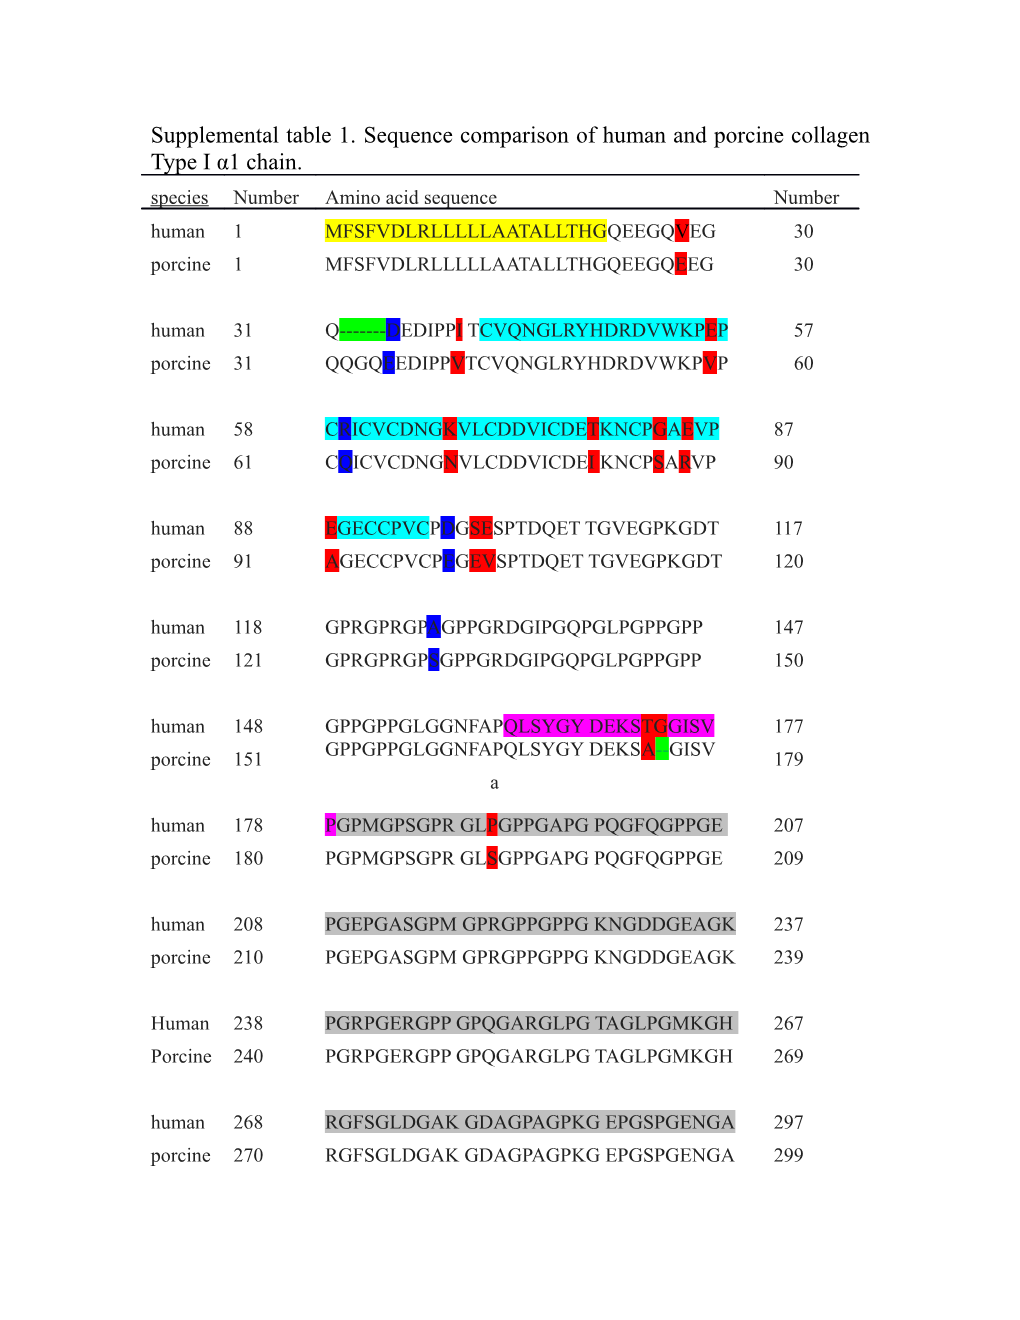 Supplemental Table 1. Sequence Comparison of Human and Porcine Collagen Type I Α1 Chain